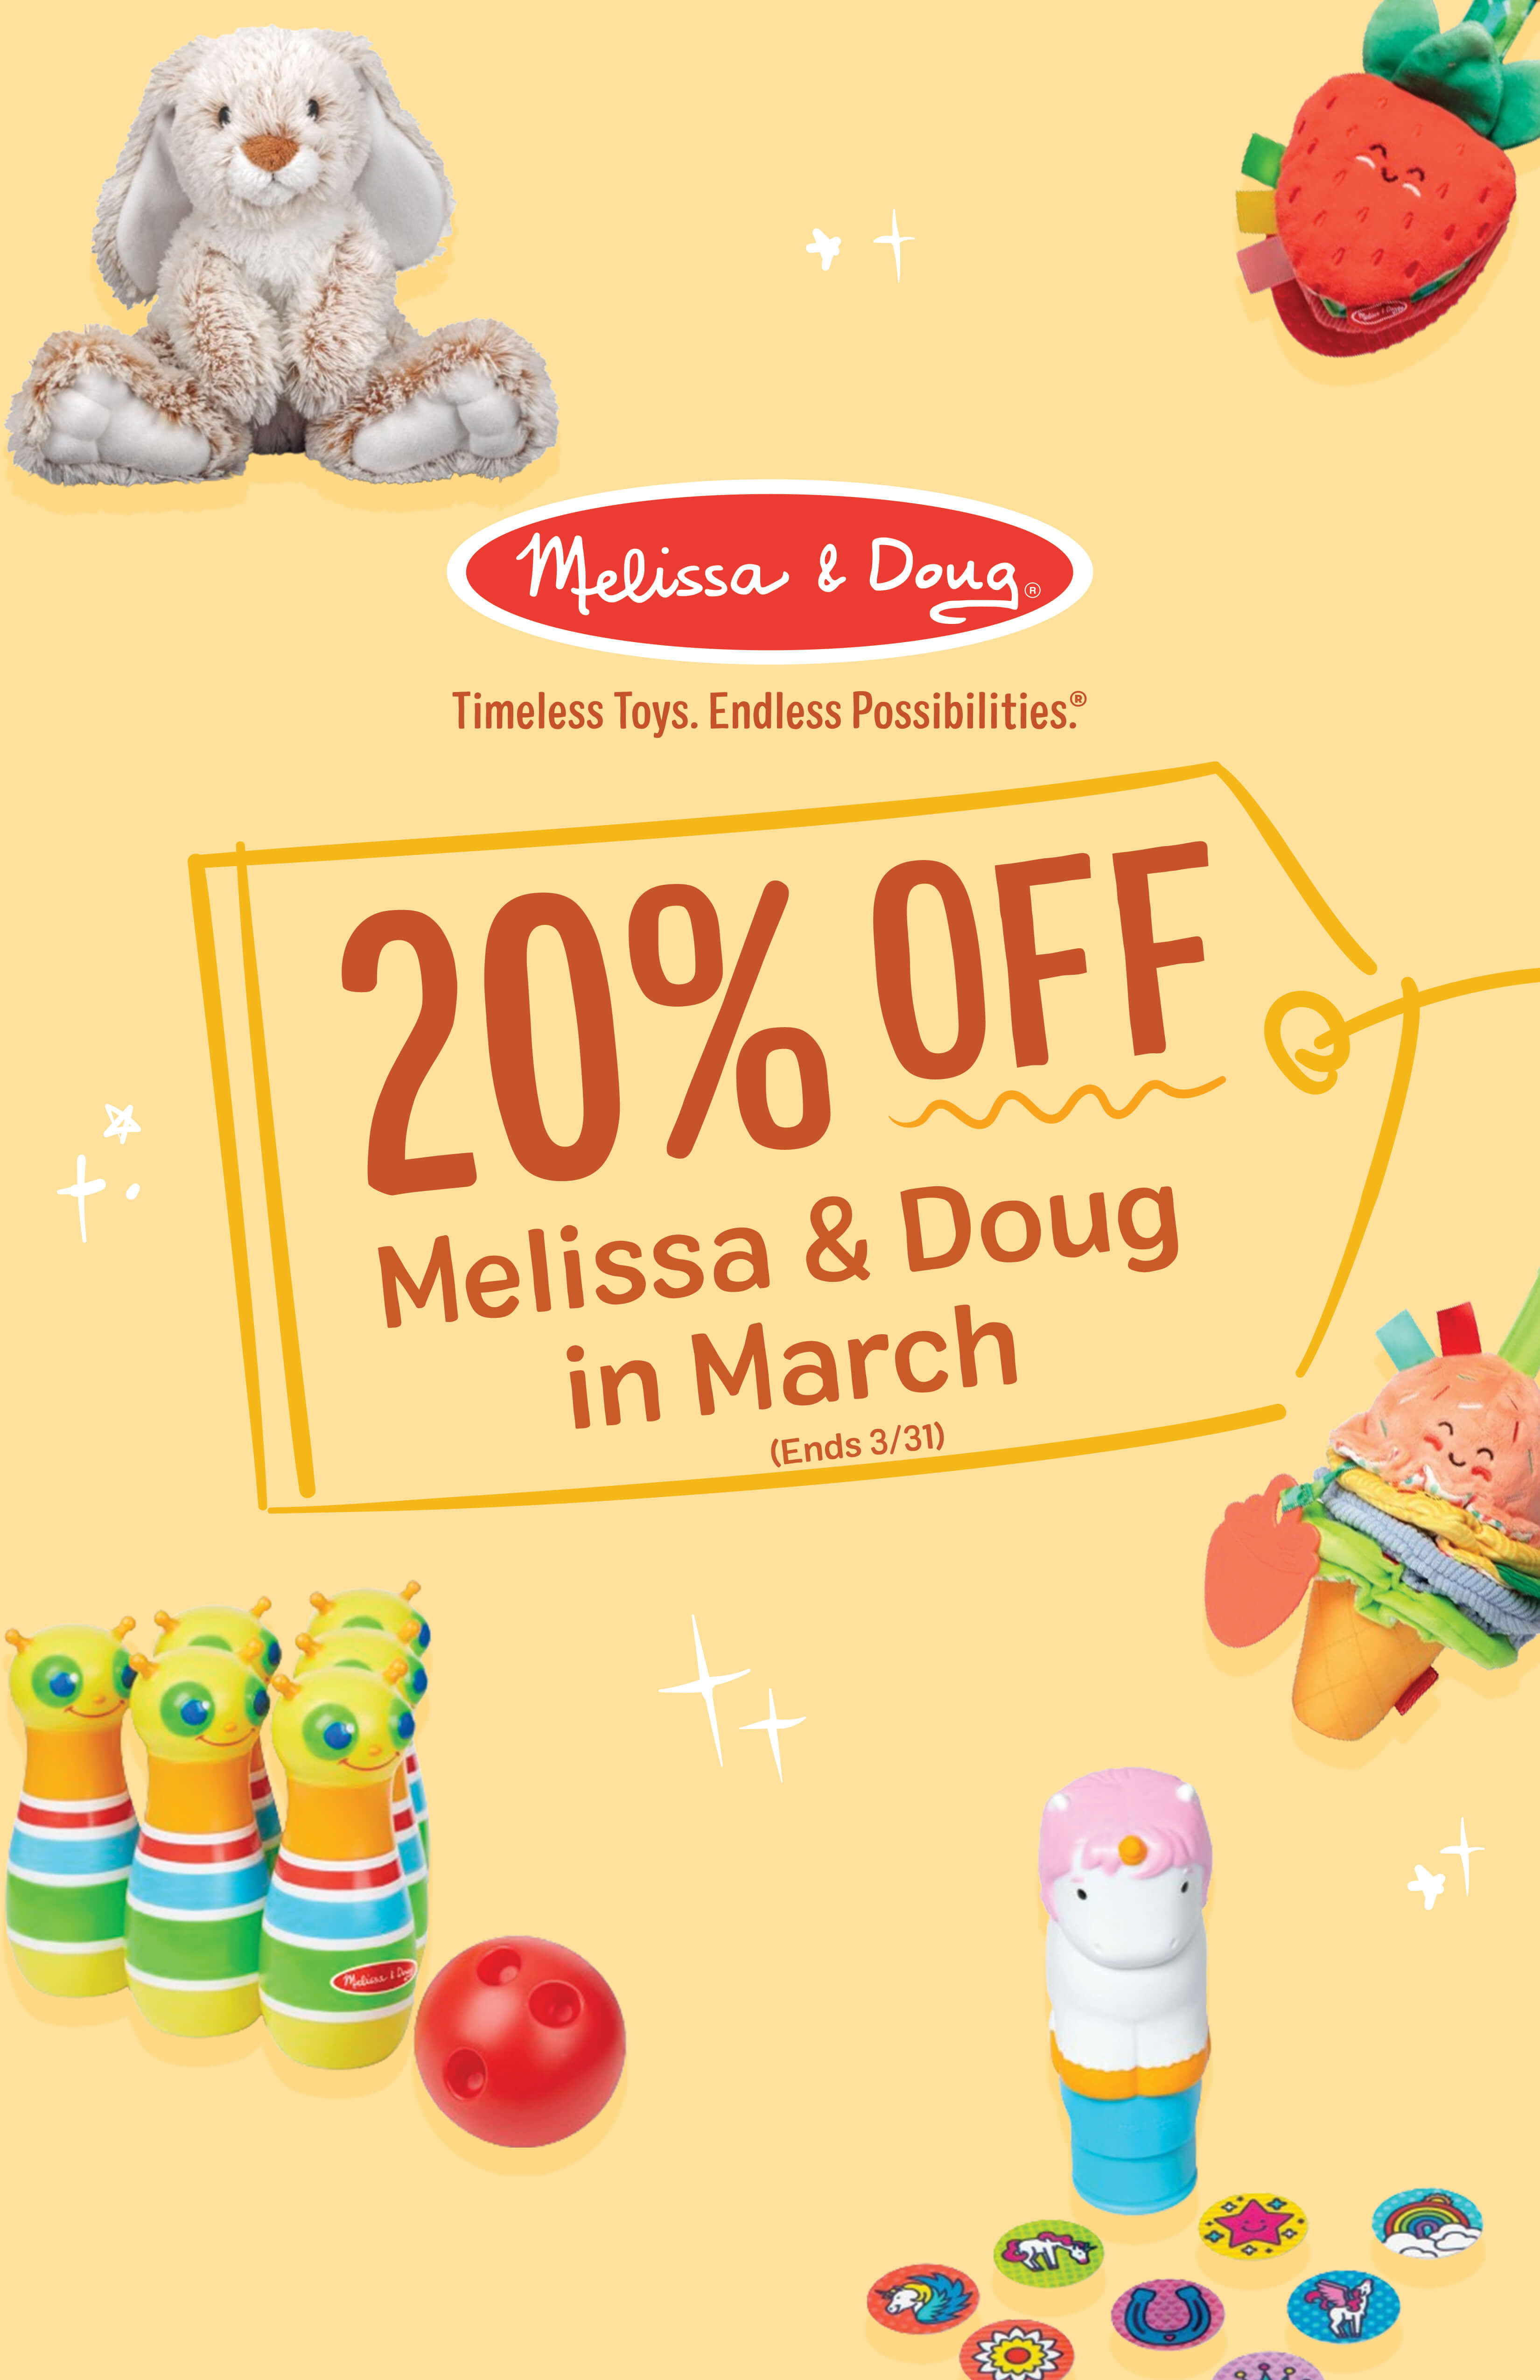 Melissa and Doug Sale - 20% off for the month of March.